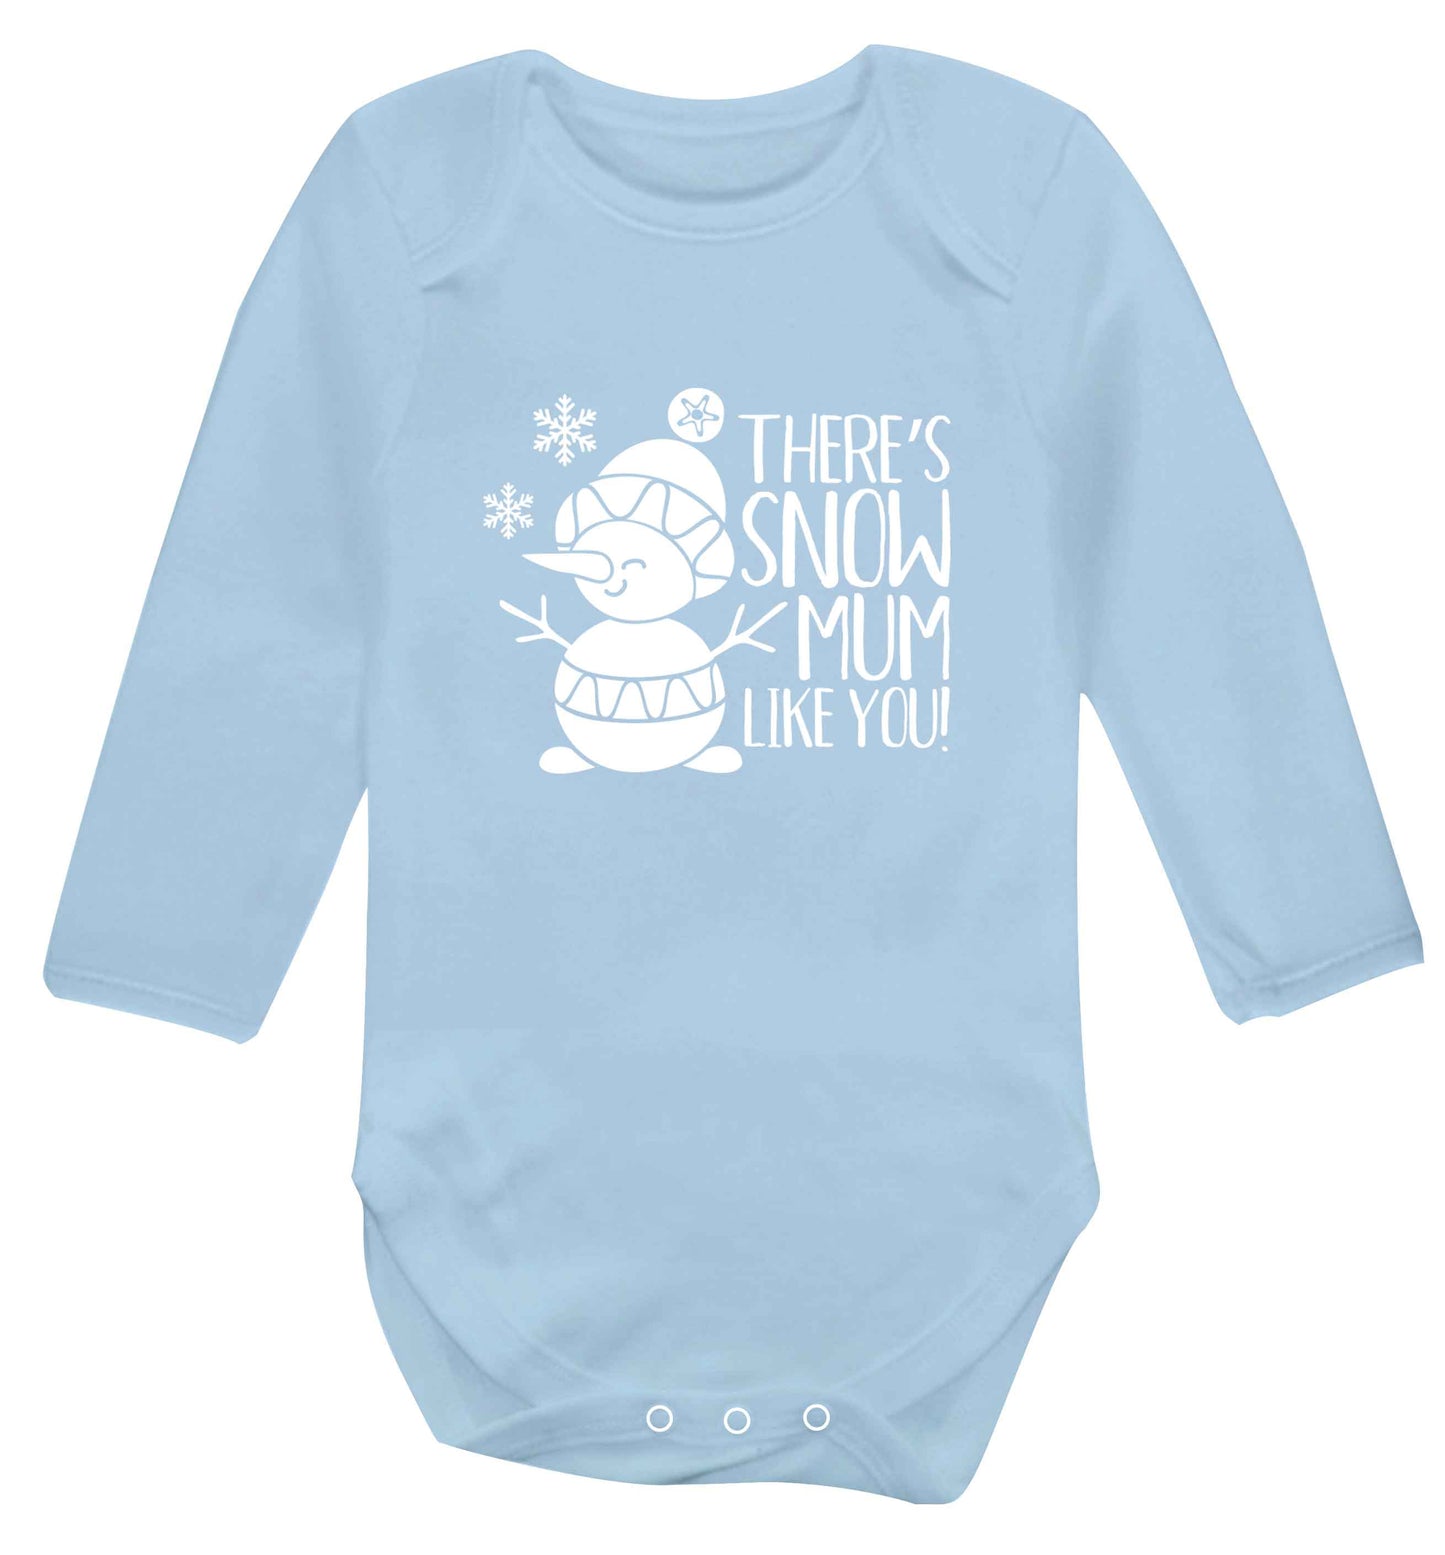 There's snow mum like you baby vest long sleeved pale blue 6-12 months